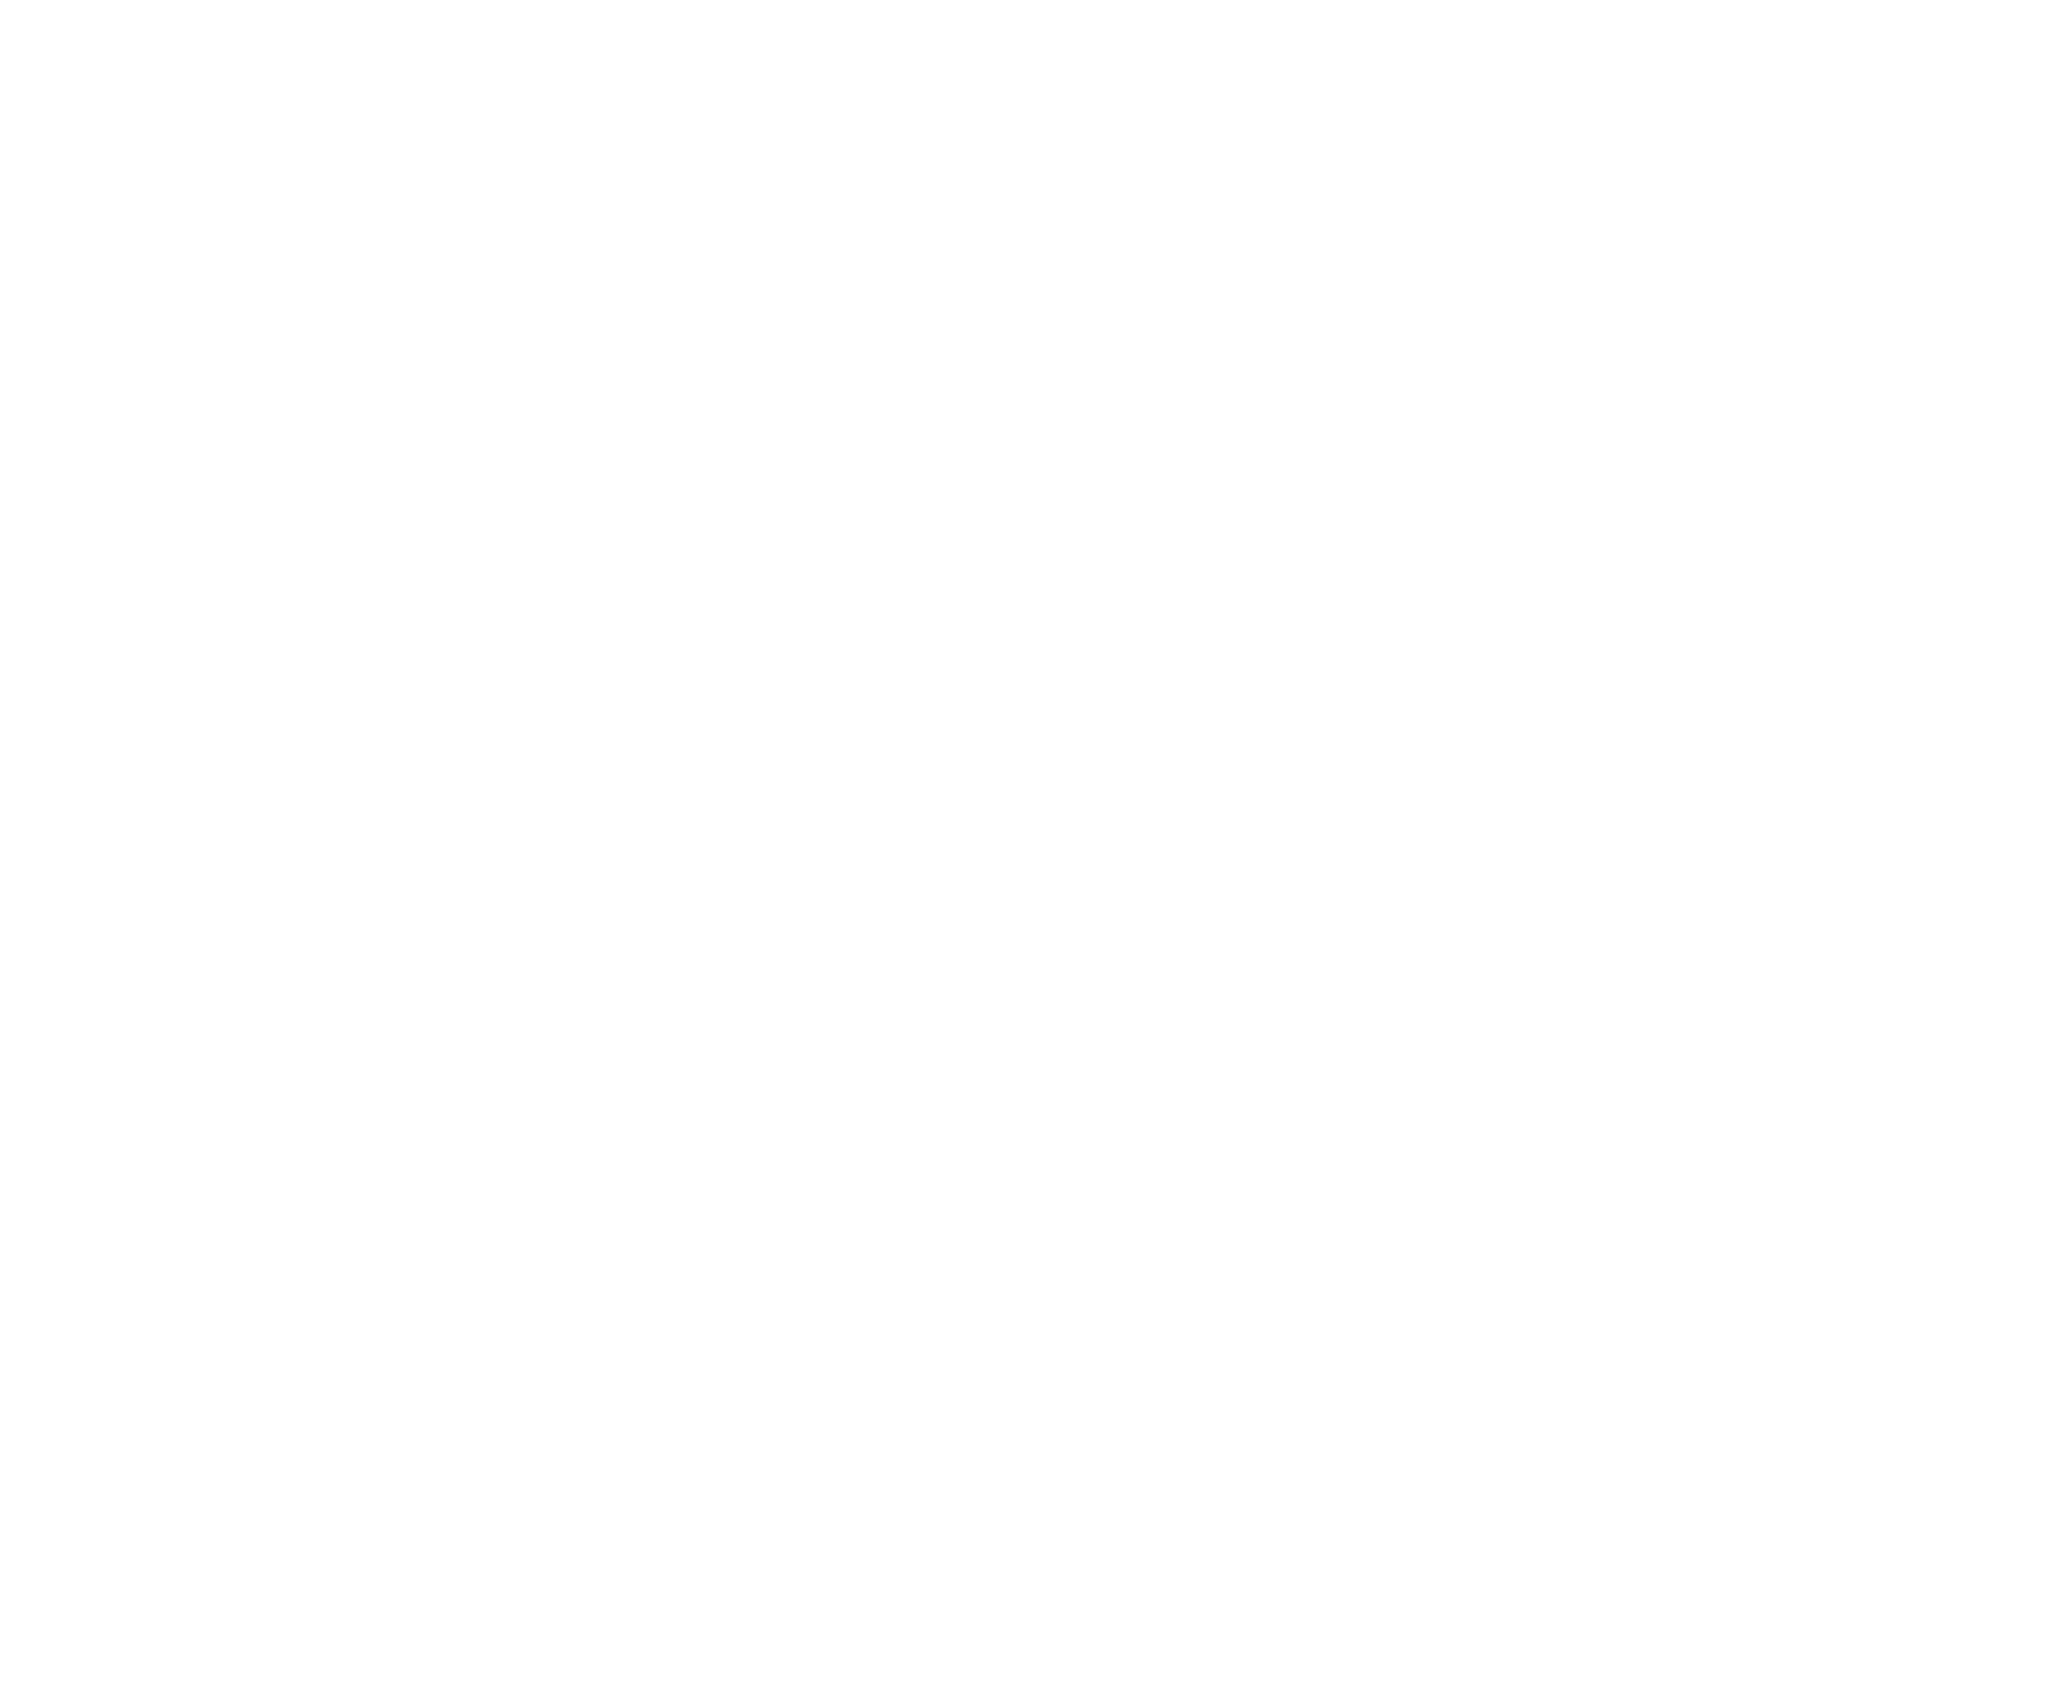 sales cadence target icon